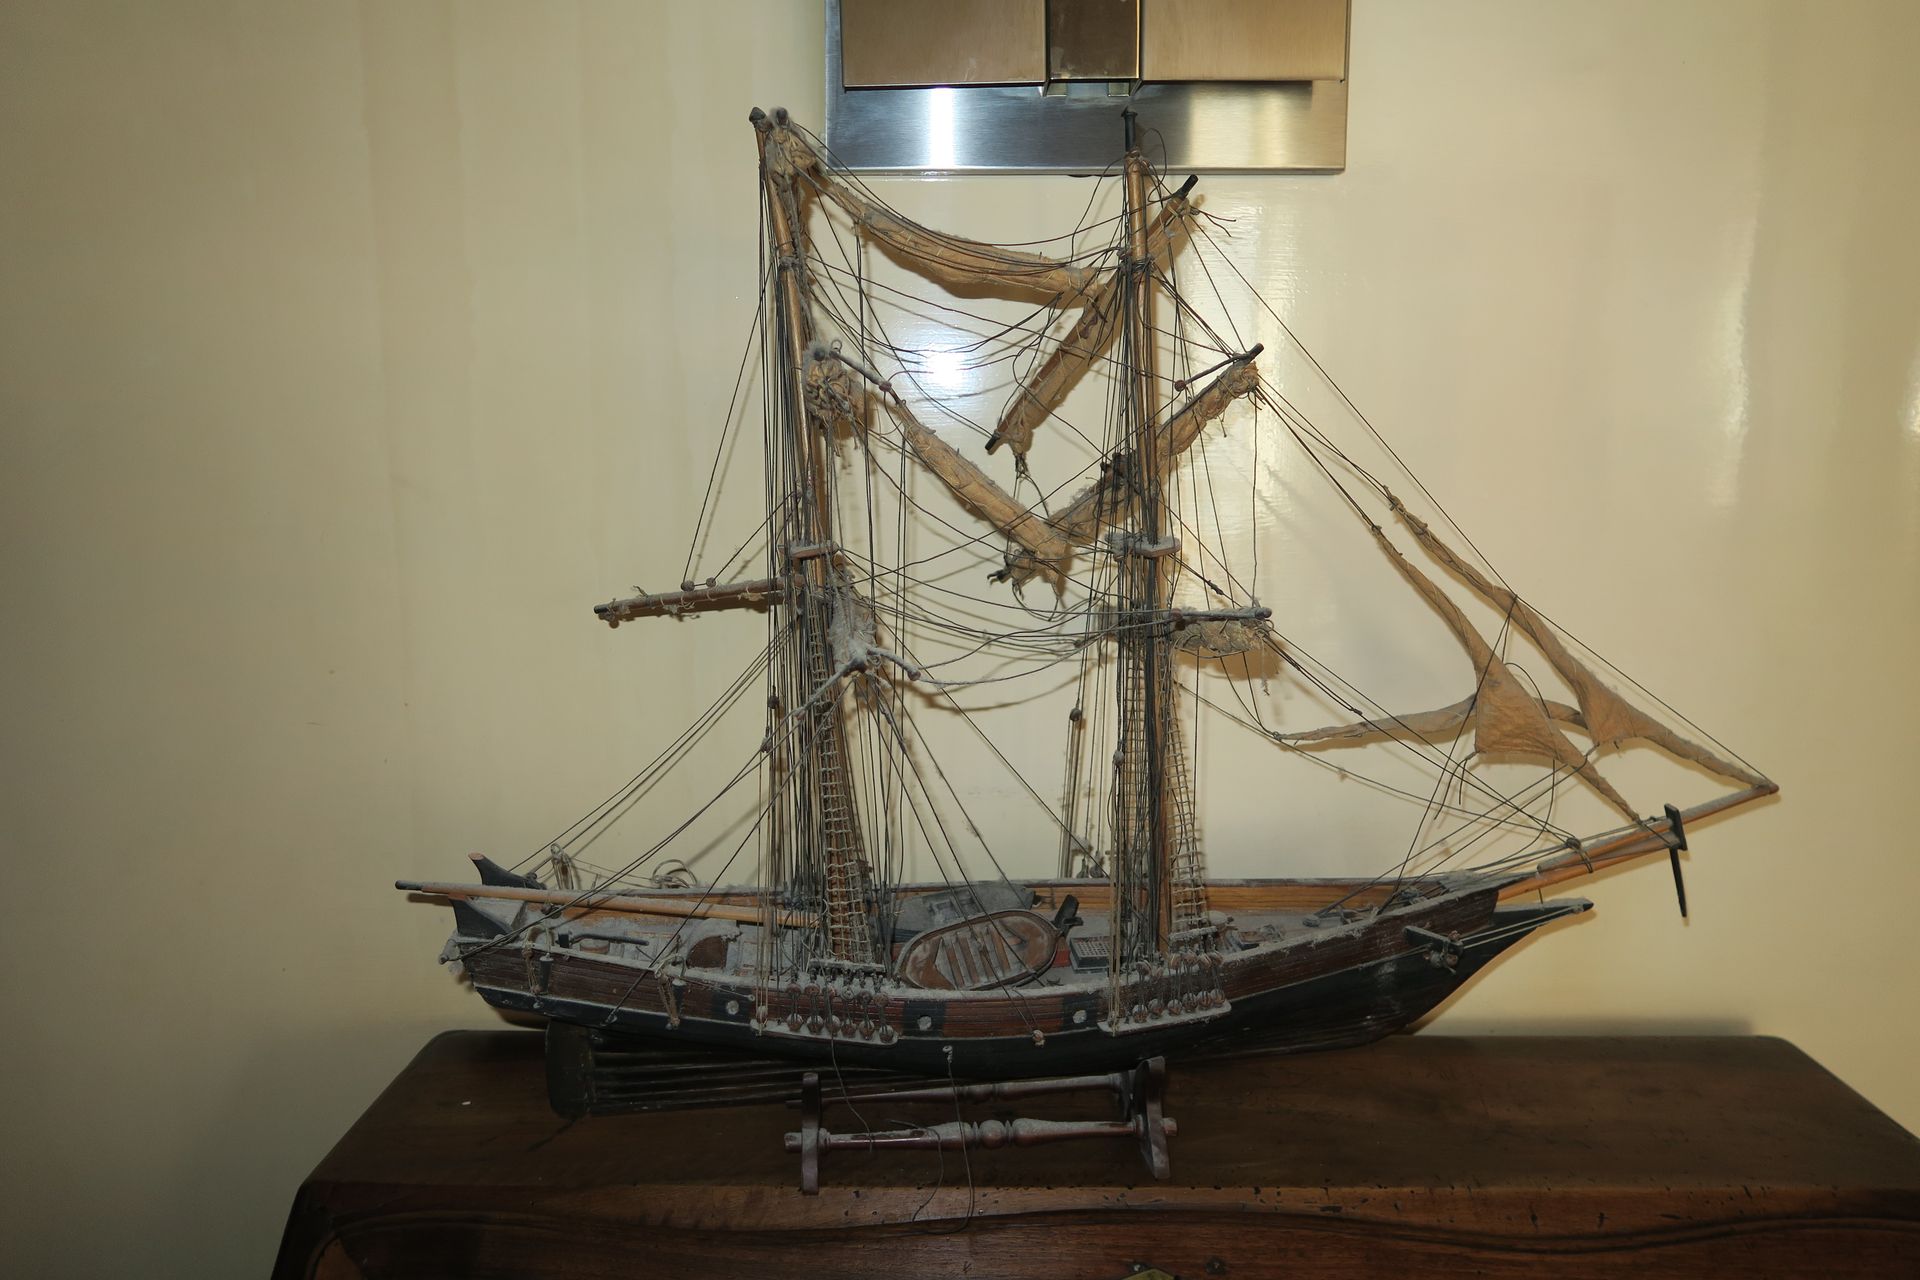 Null Model of a wooden sailboat (Accidents) 58 x 78 cm approximately